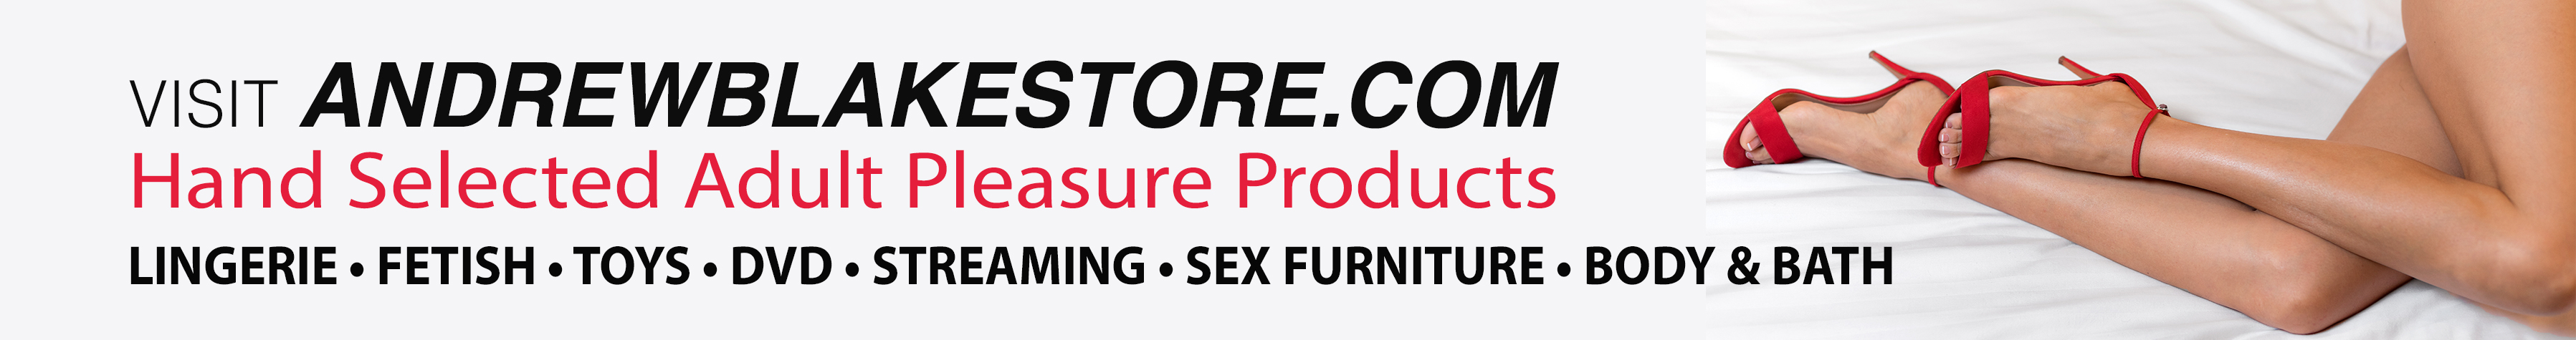 SHOP FOR PLEASURE PRODUCTS